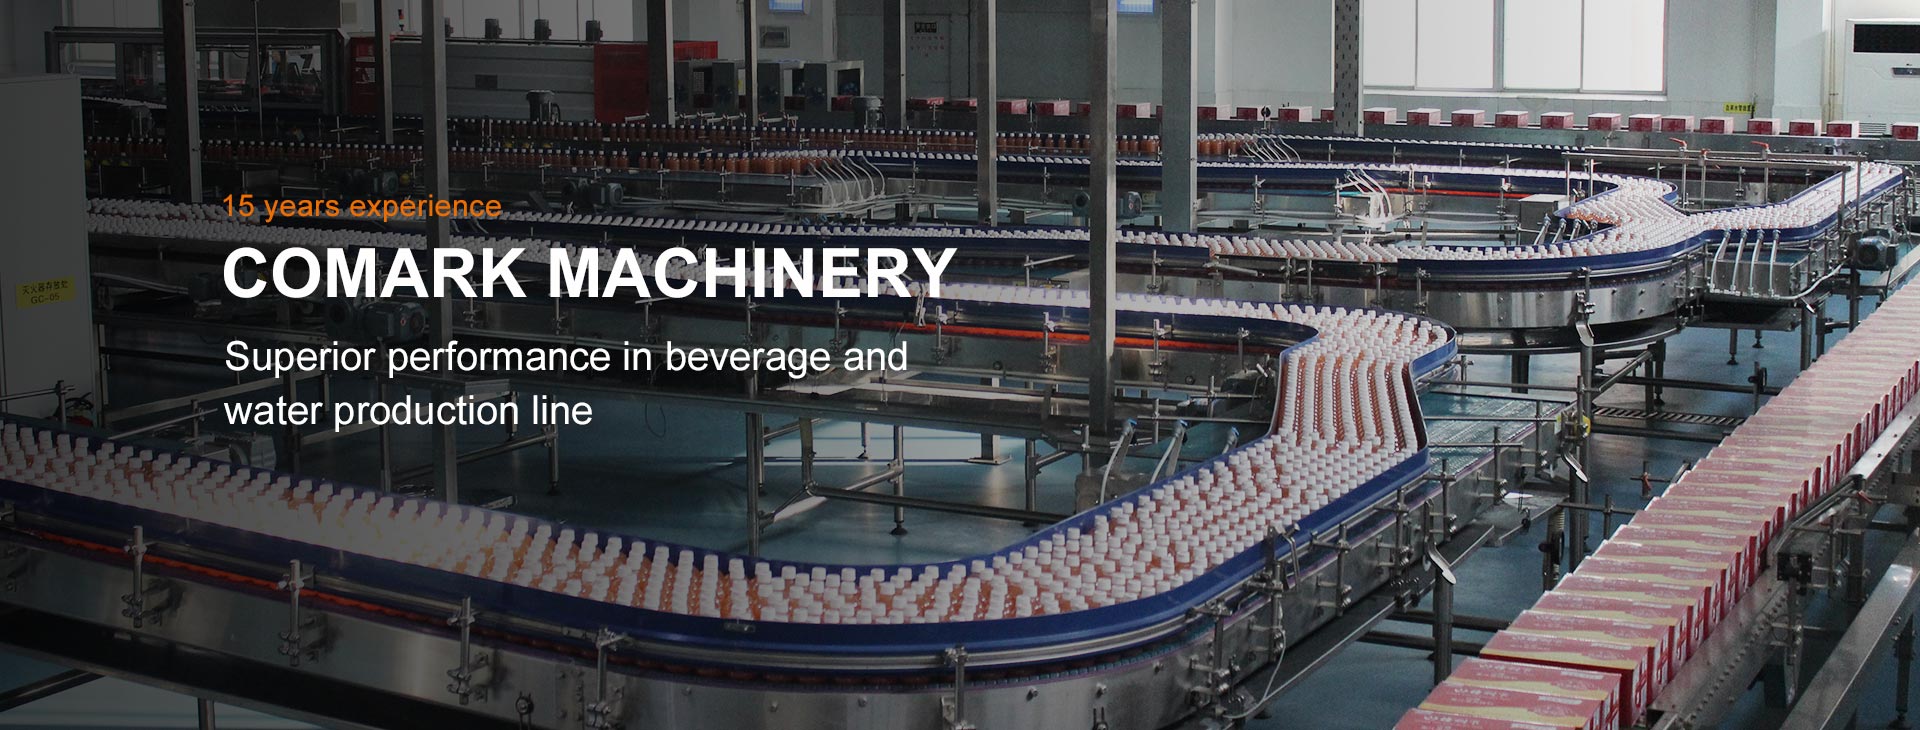 drink manufacturing equipment company